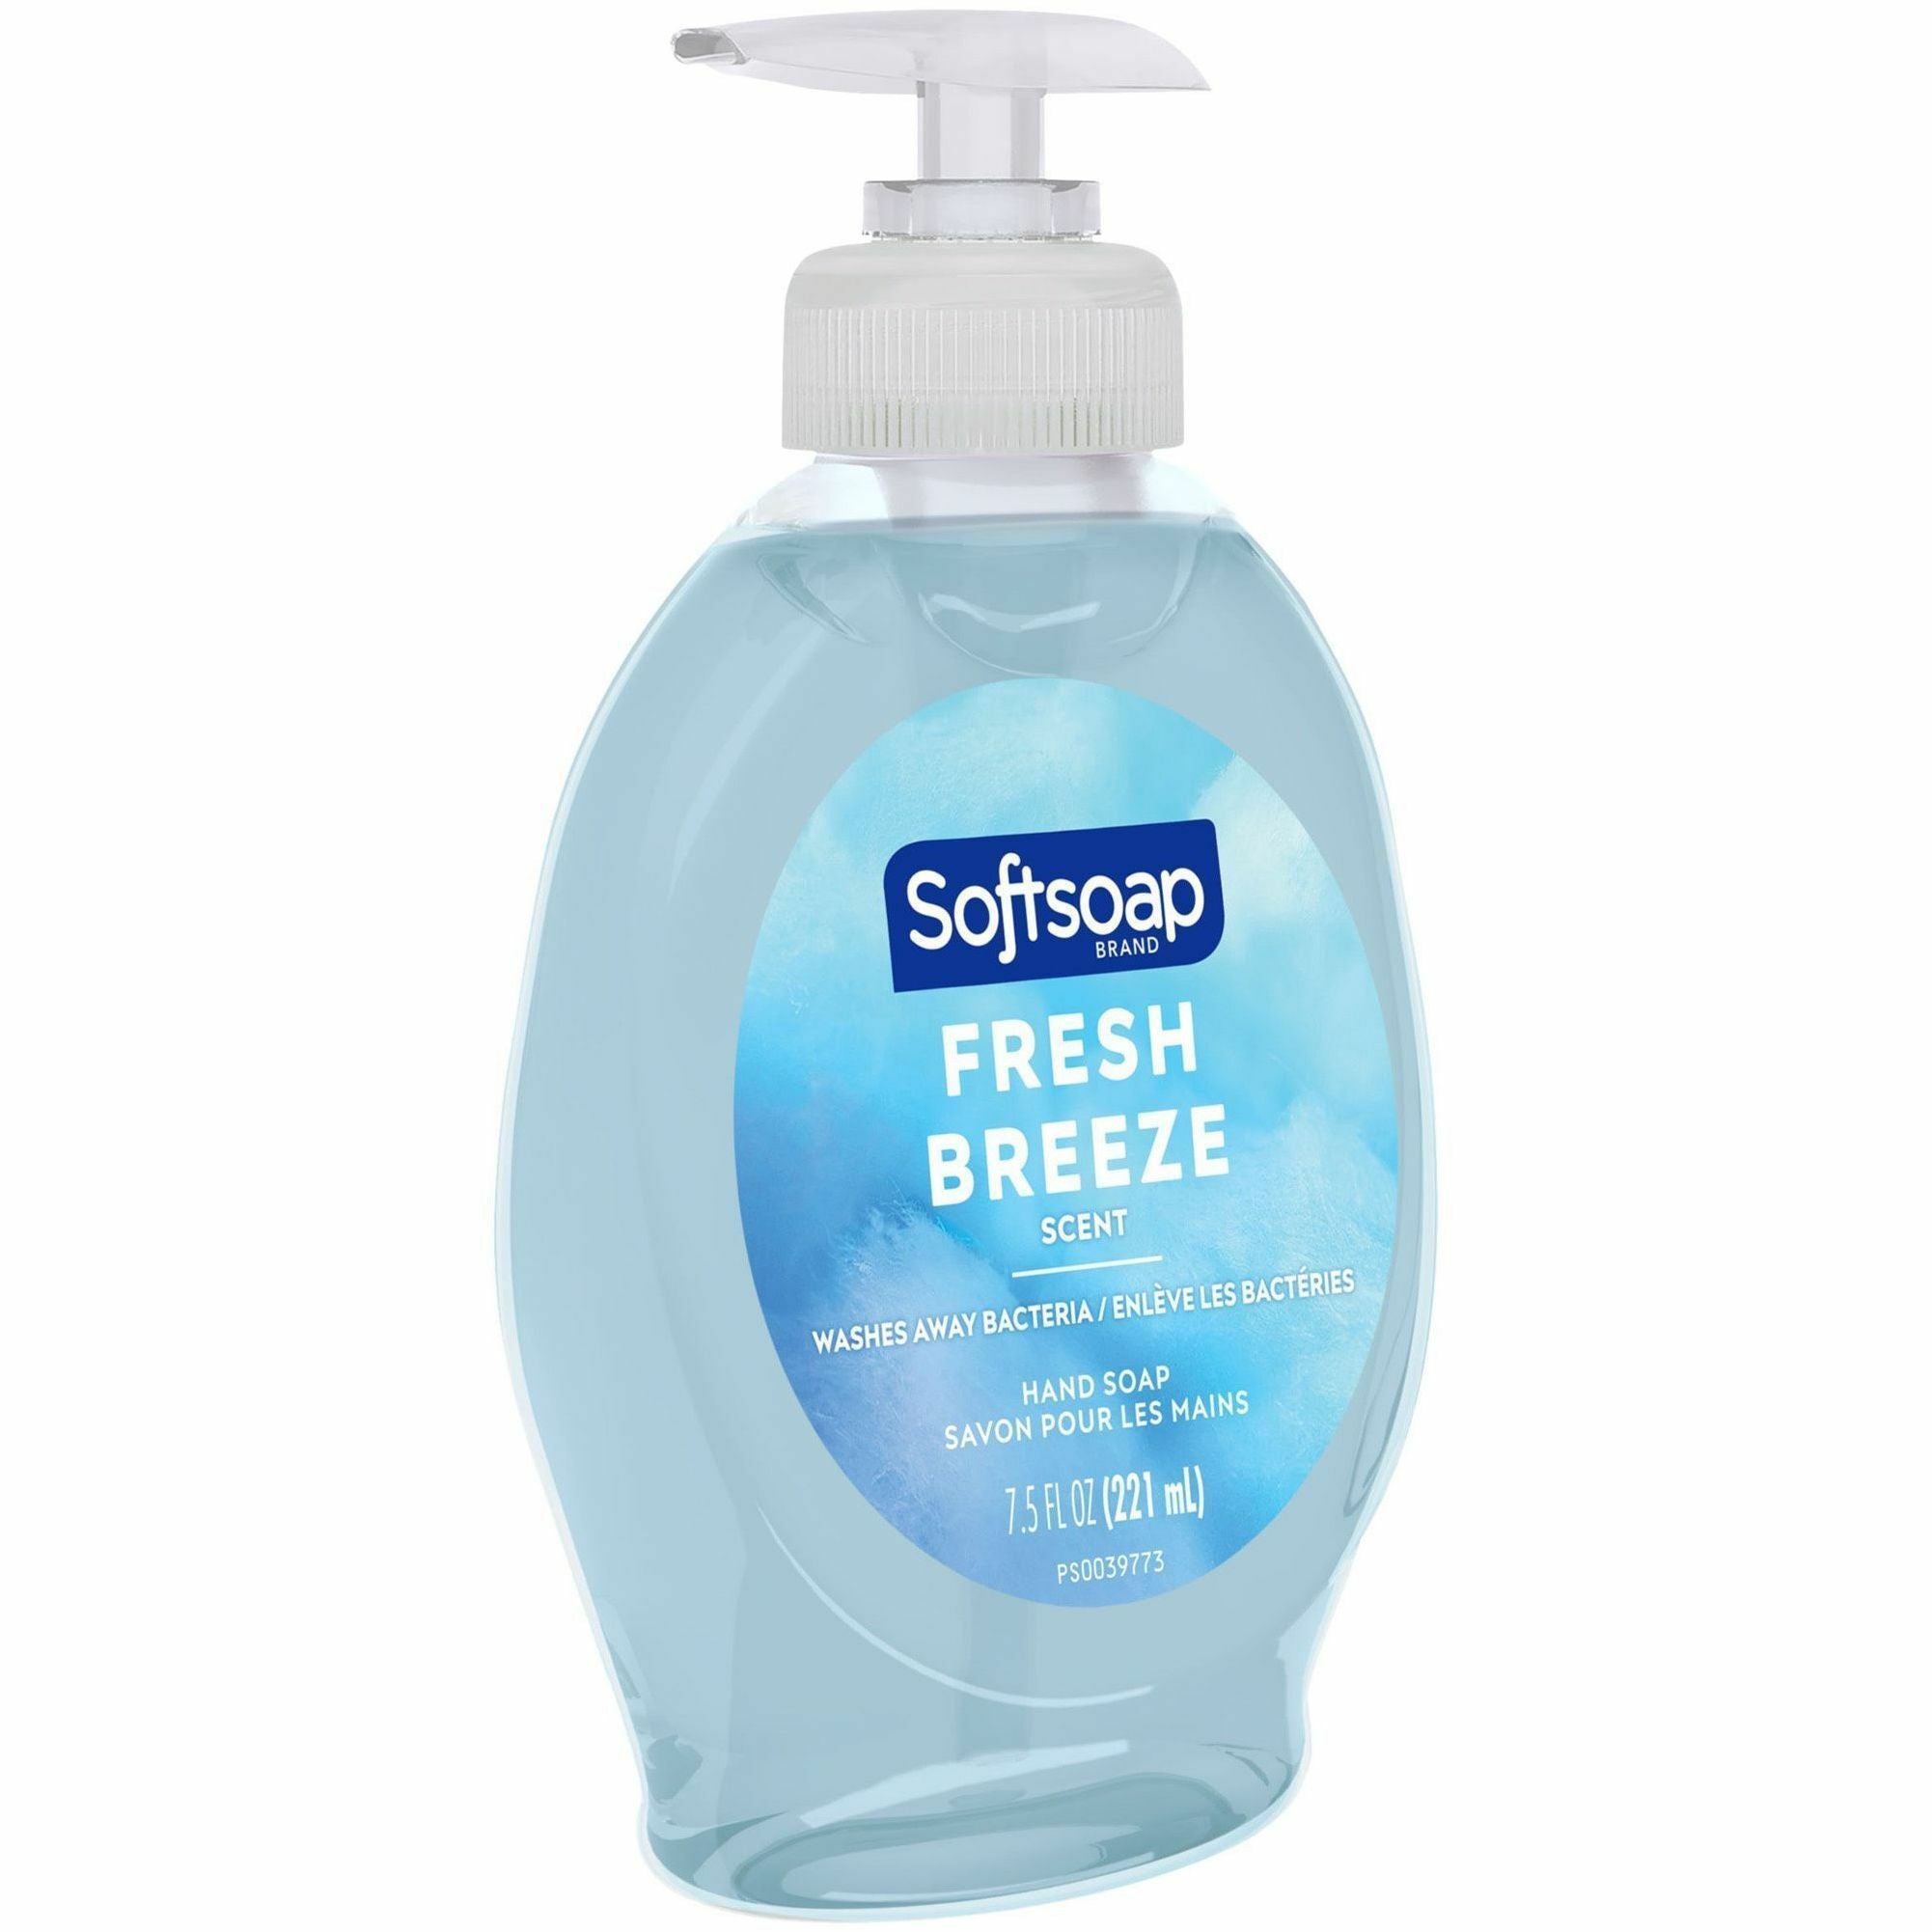 softsoap-fresh-breeze-hand-soap_cpcus04964act - 5